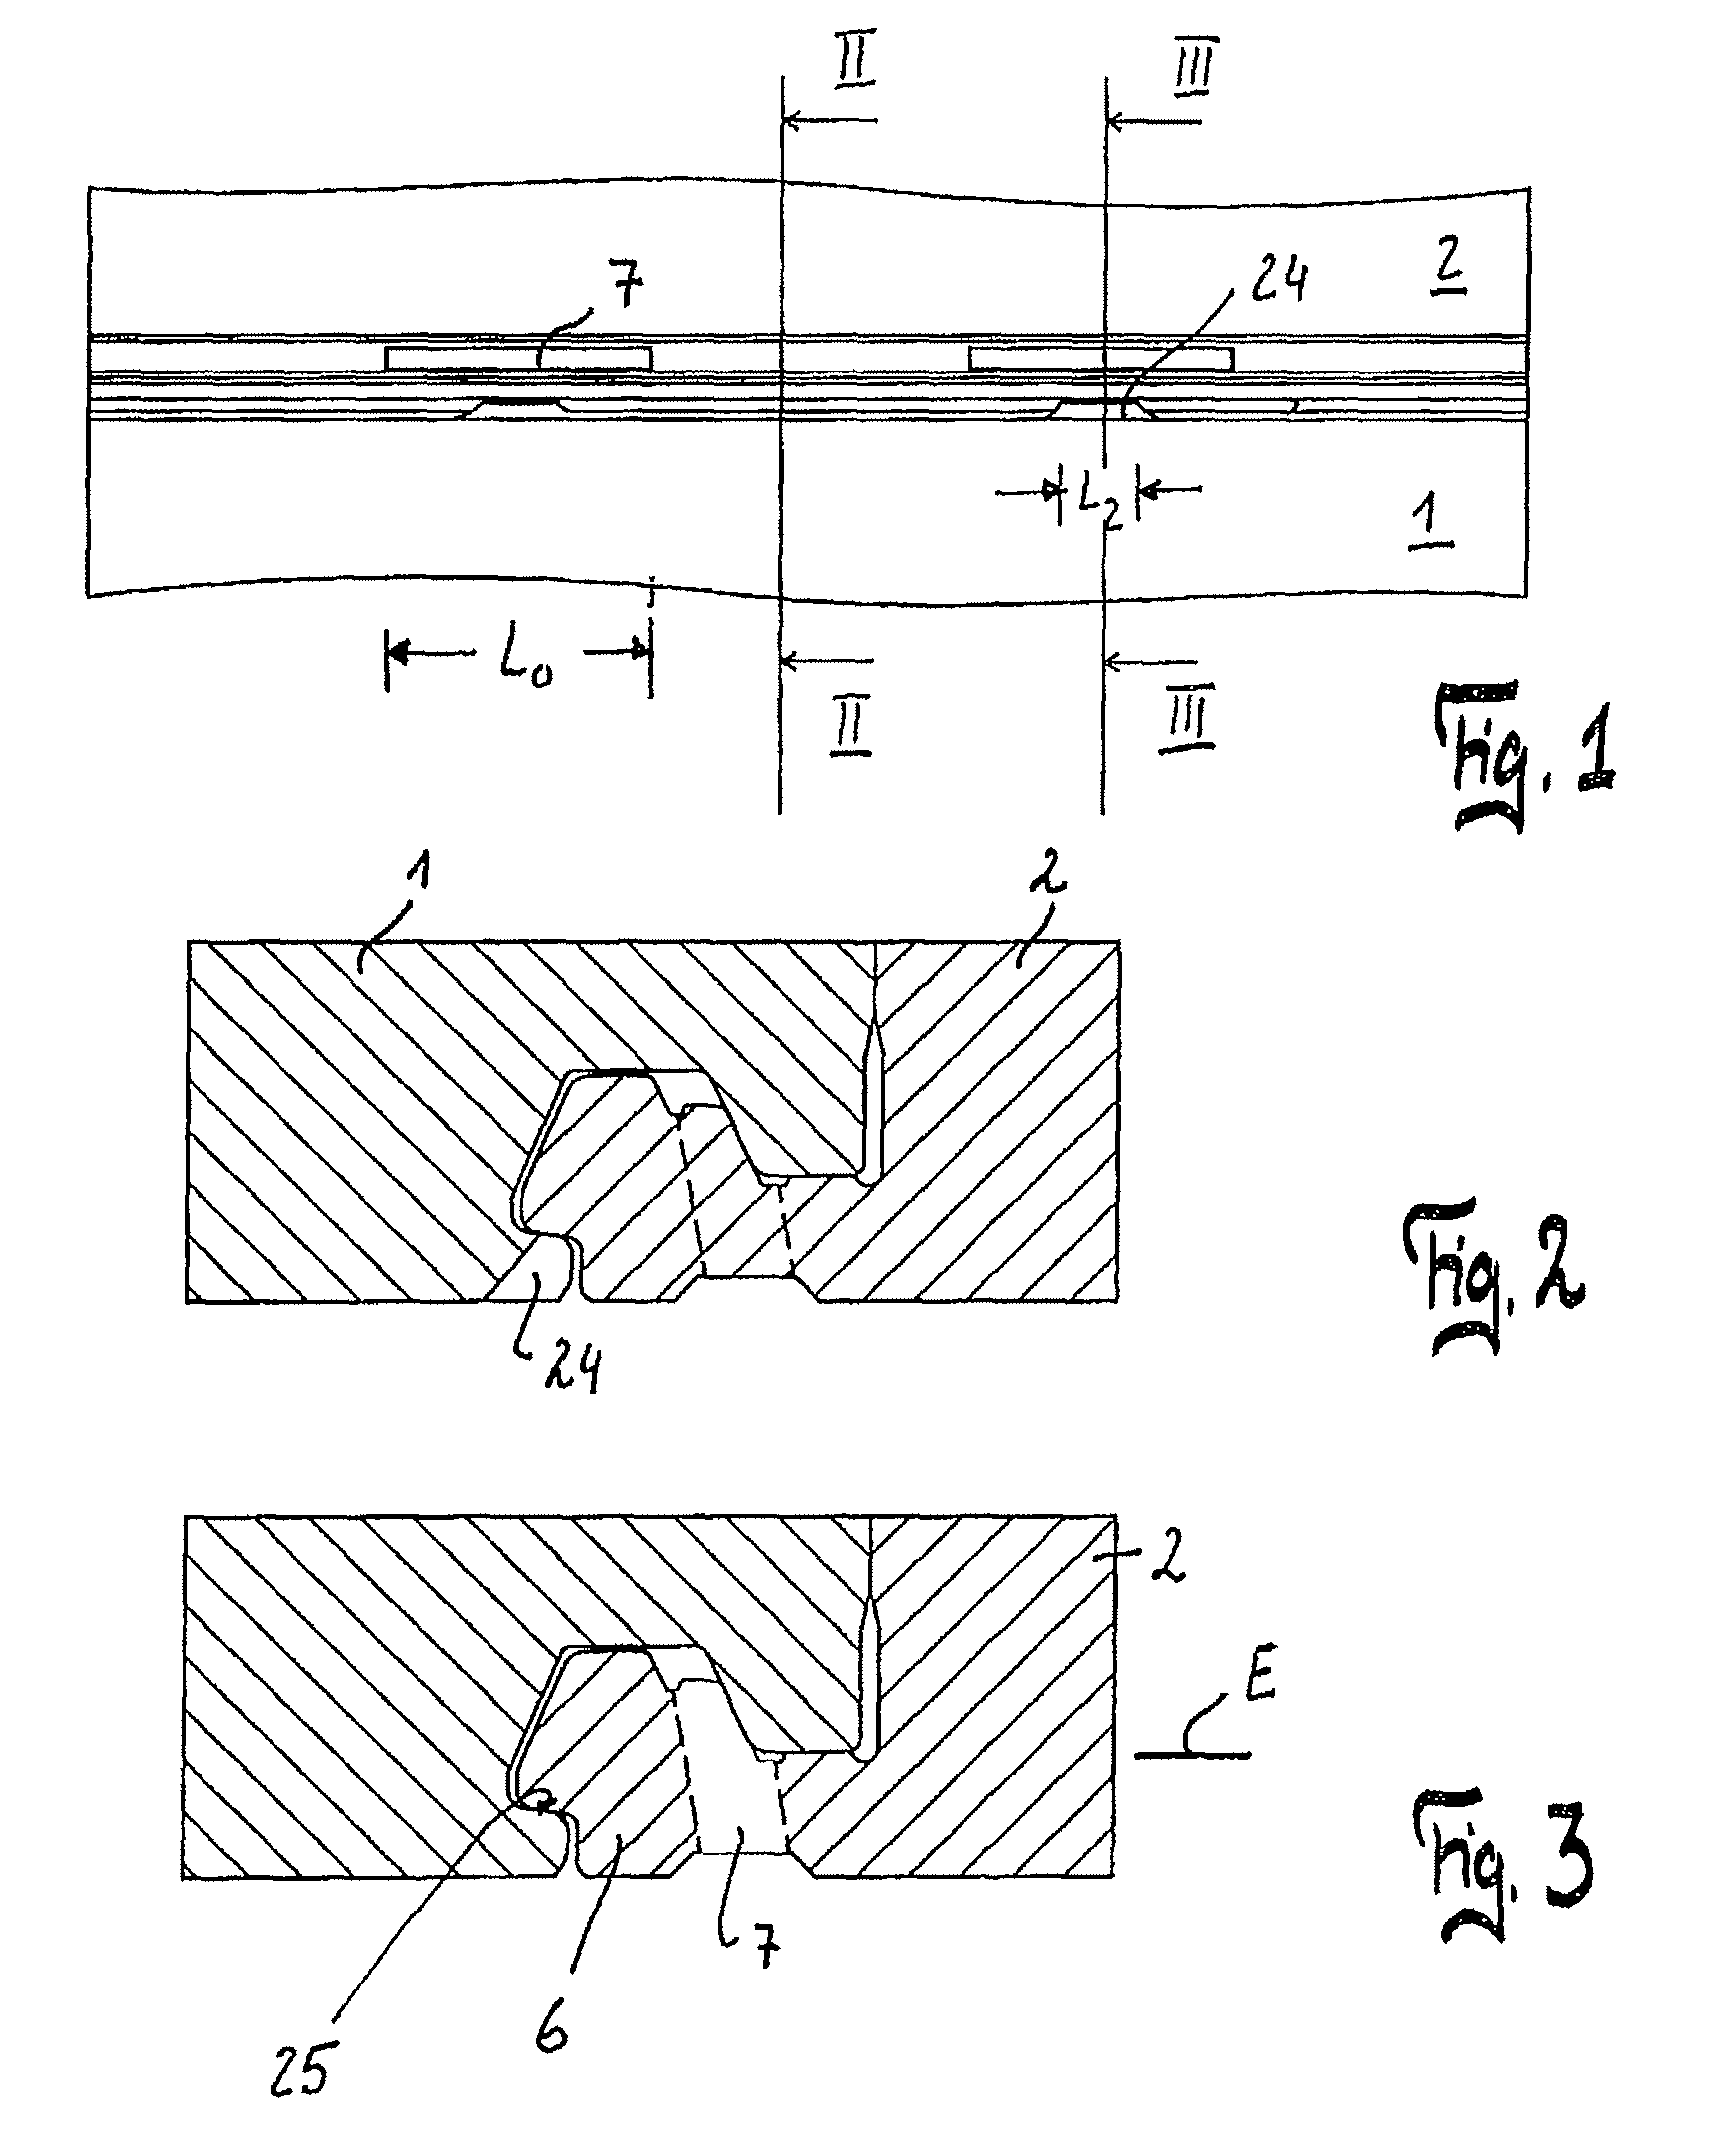 Panel, method of joining panels and method manufacturing panels